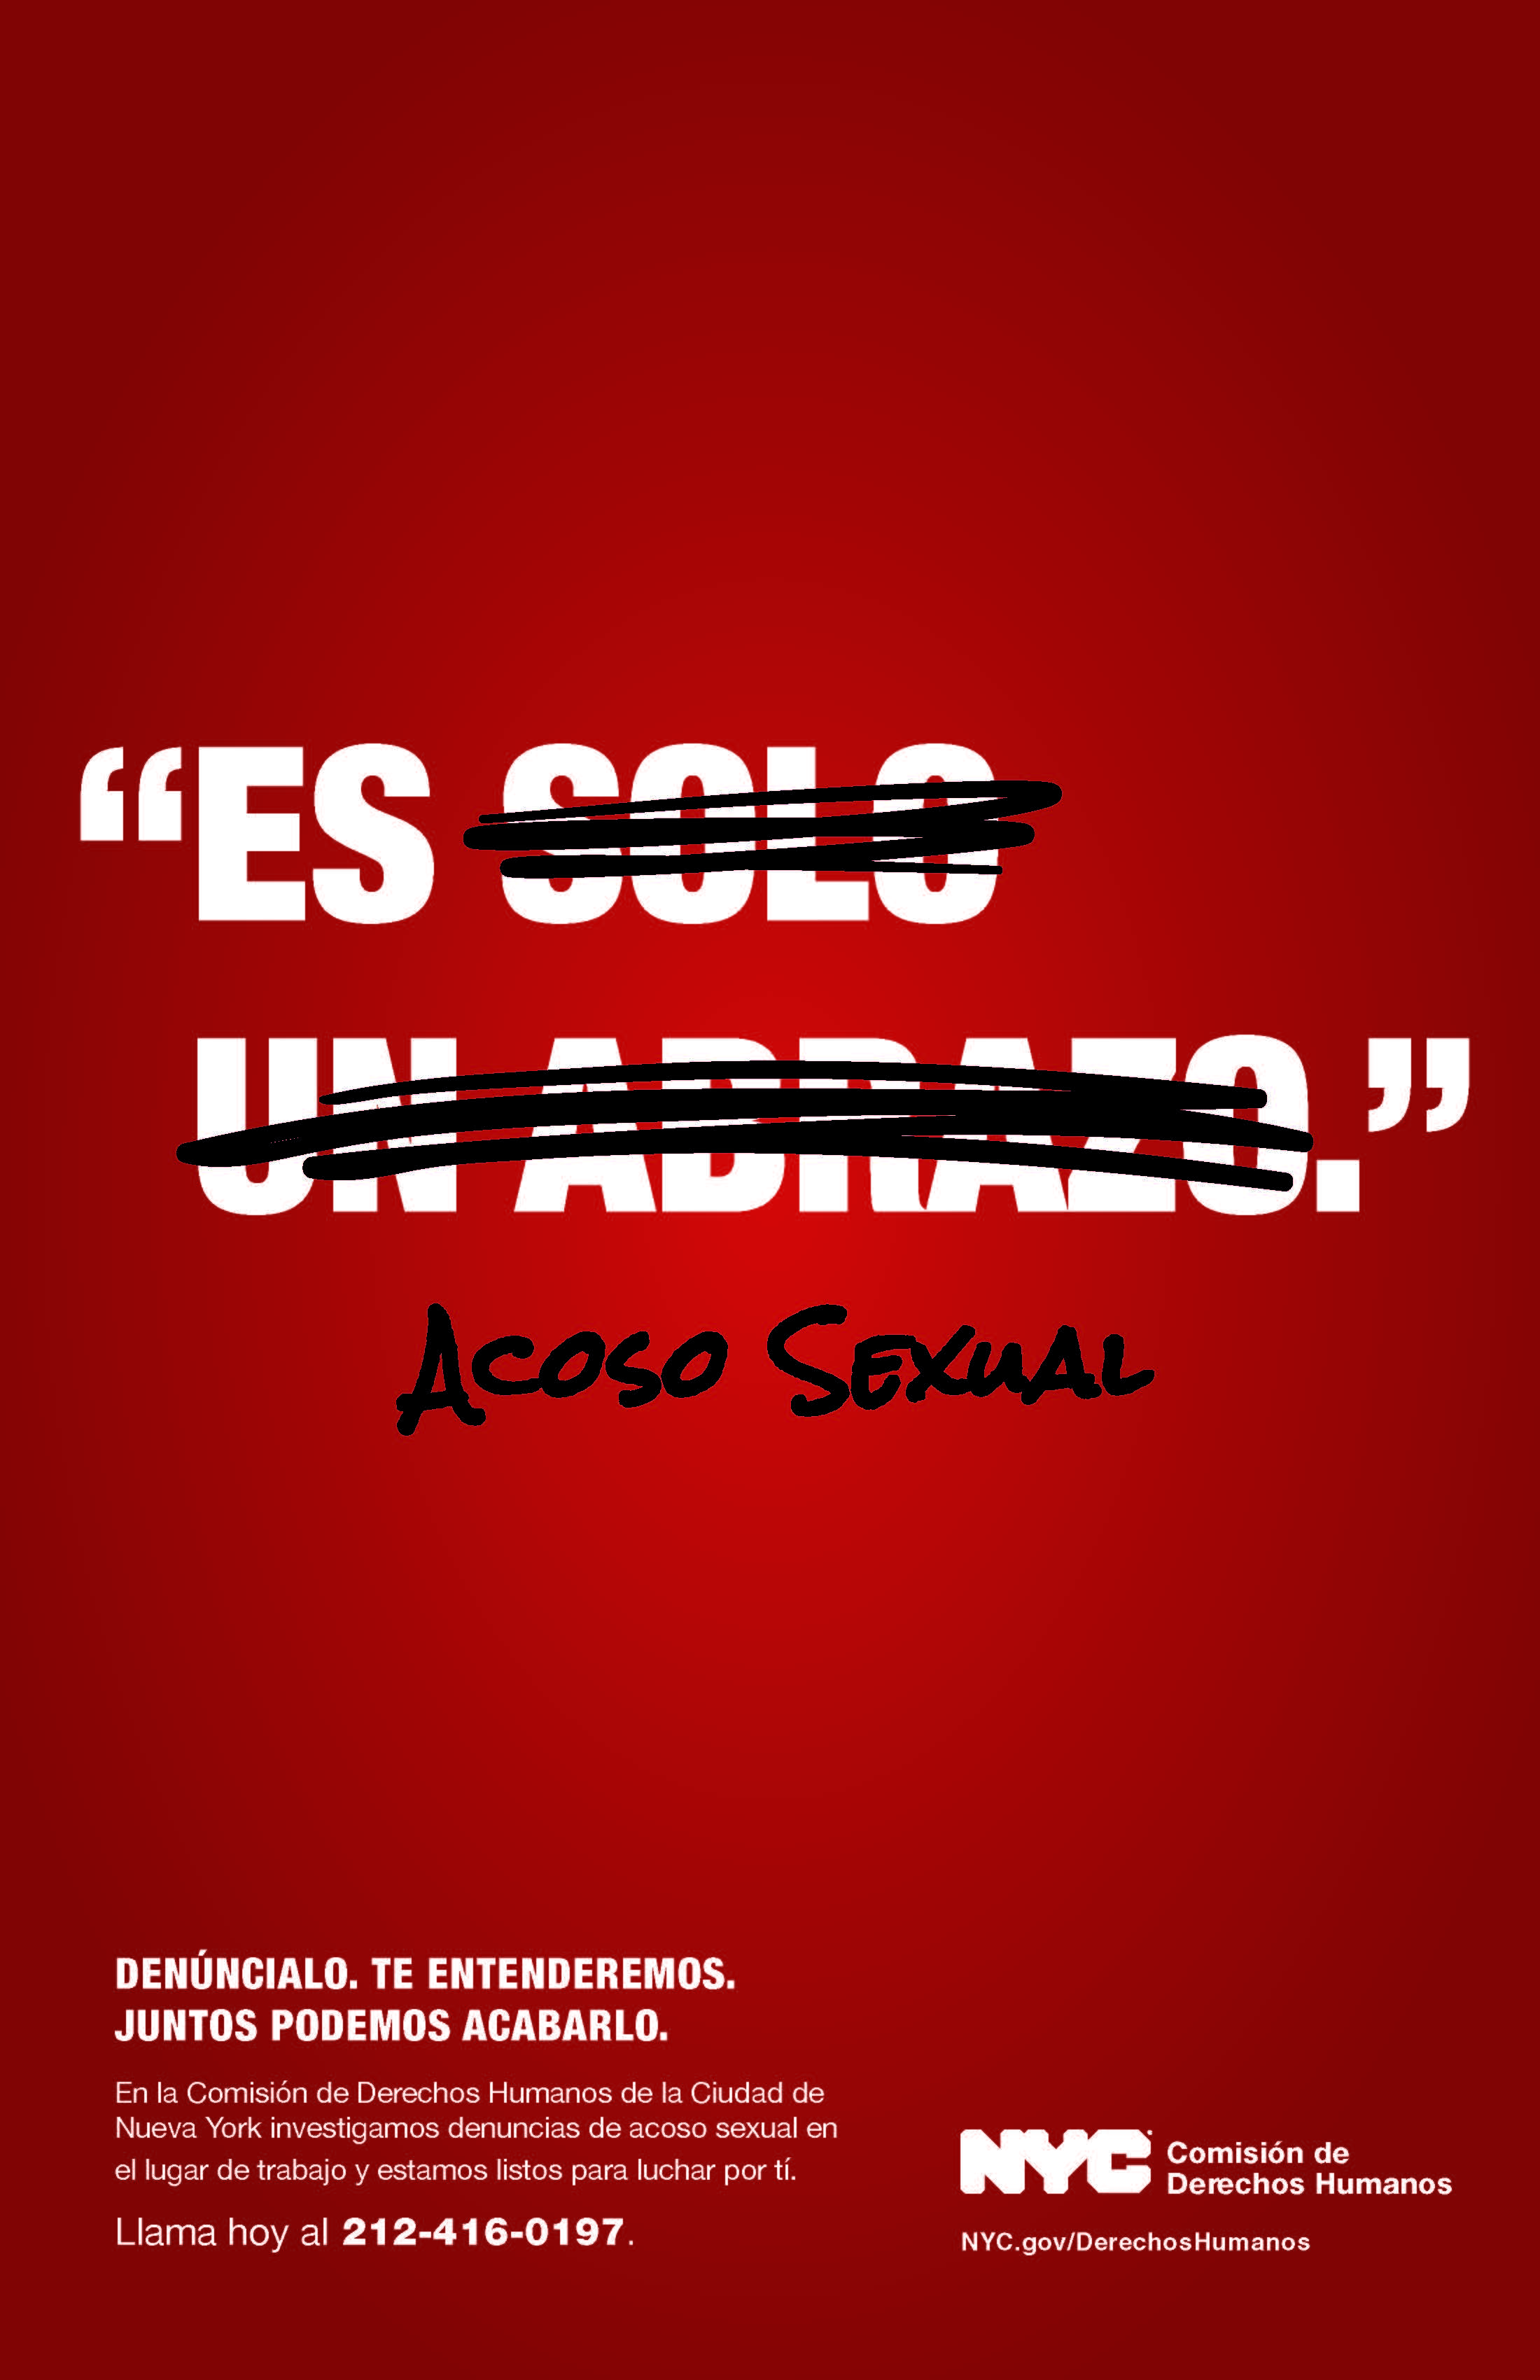 Text reading es acoso sexual with solo un abrazo crossed out